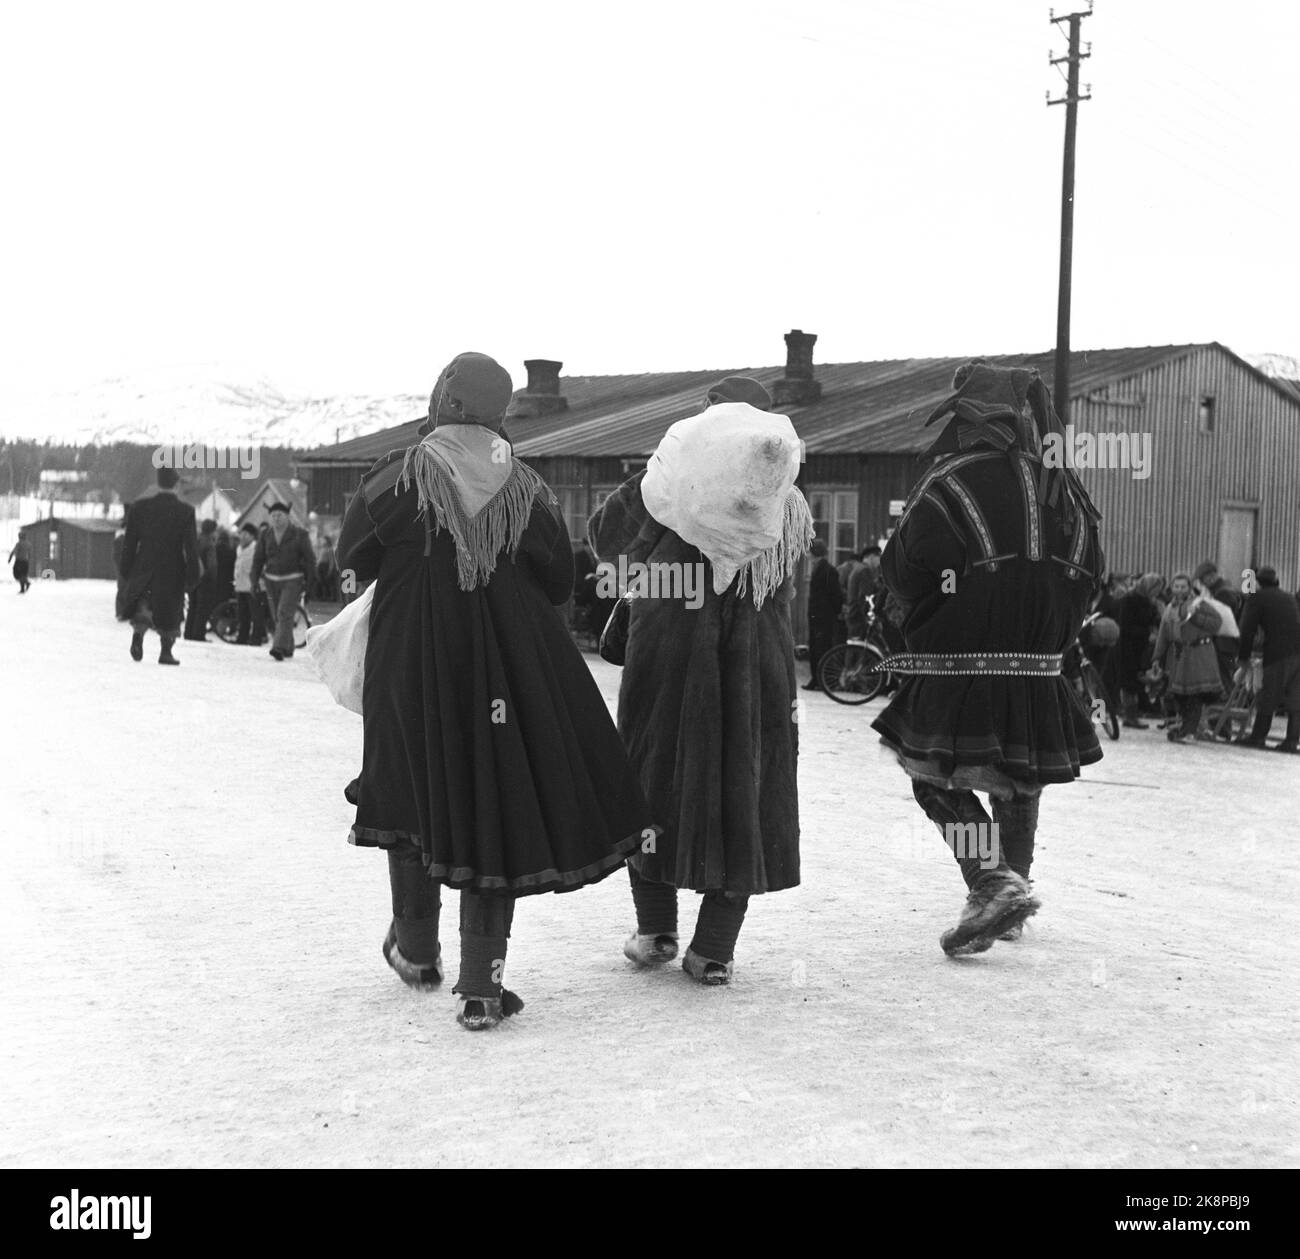 Alta, Bossekop 19520419. Bossekop- The market, the large famous Sami market that is gathered every year at the Samvirkelaget in Alta. Here, there are many from the ridges nearby to sell household goods, reindeer meat and leather. The trade goes lively. The goods are transported in bags by truck from Gargia Fjellstue, which is the gathering place for the Sami after they have come down from Vidda. About. 40-50,000 kg. Meat is delivered to the market. Here we see Sami On the way to the market with sack on the back. Photo: Sverre A. Børretzen / Current / NTB Stock Photo